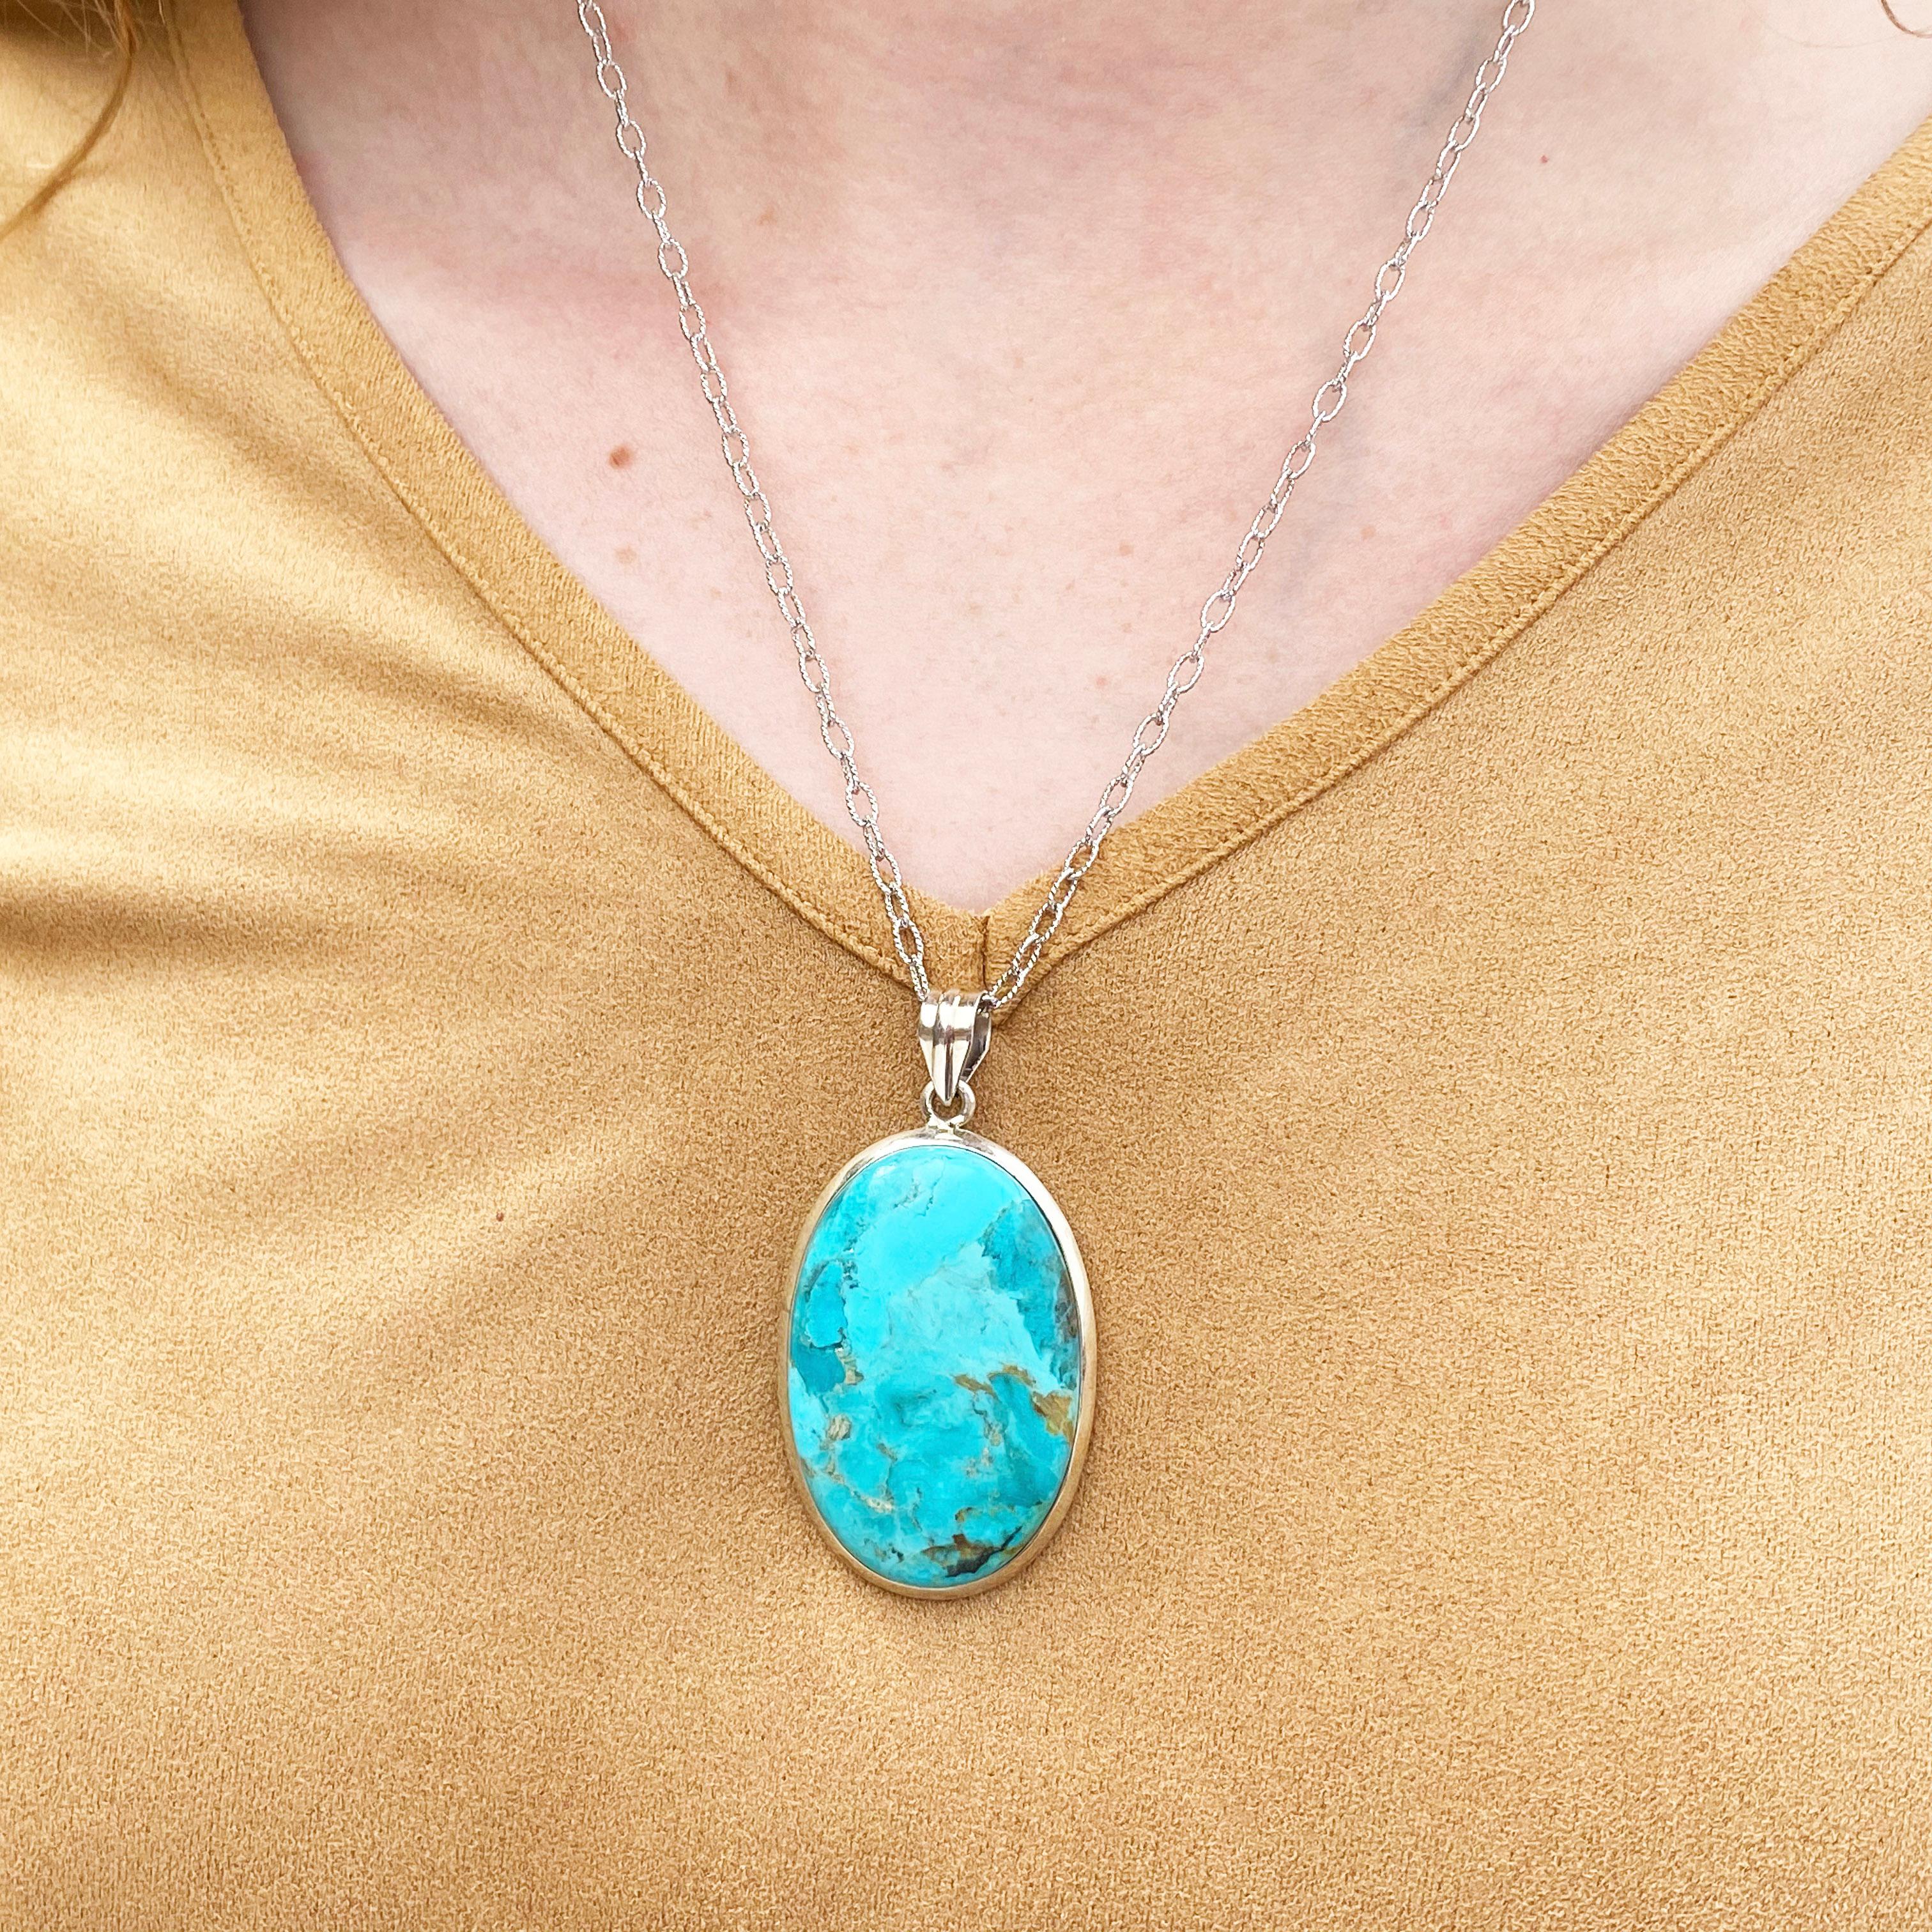 Focal Pendant Necklace Bastet Sterling Silver and Turquoise